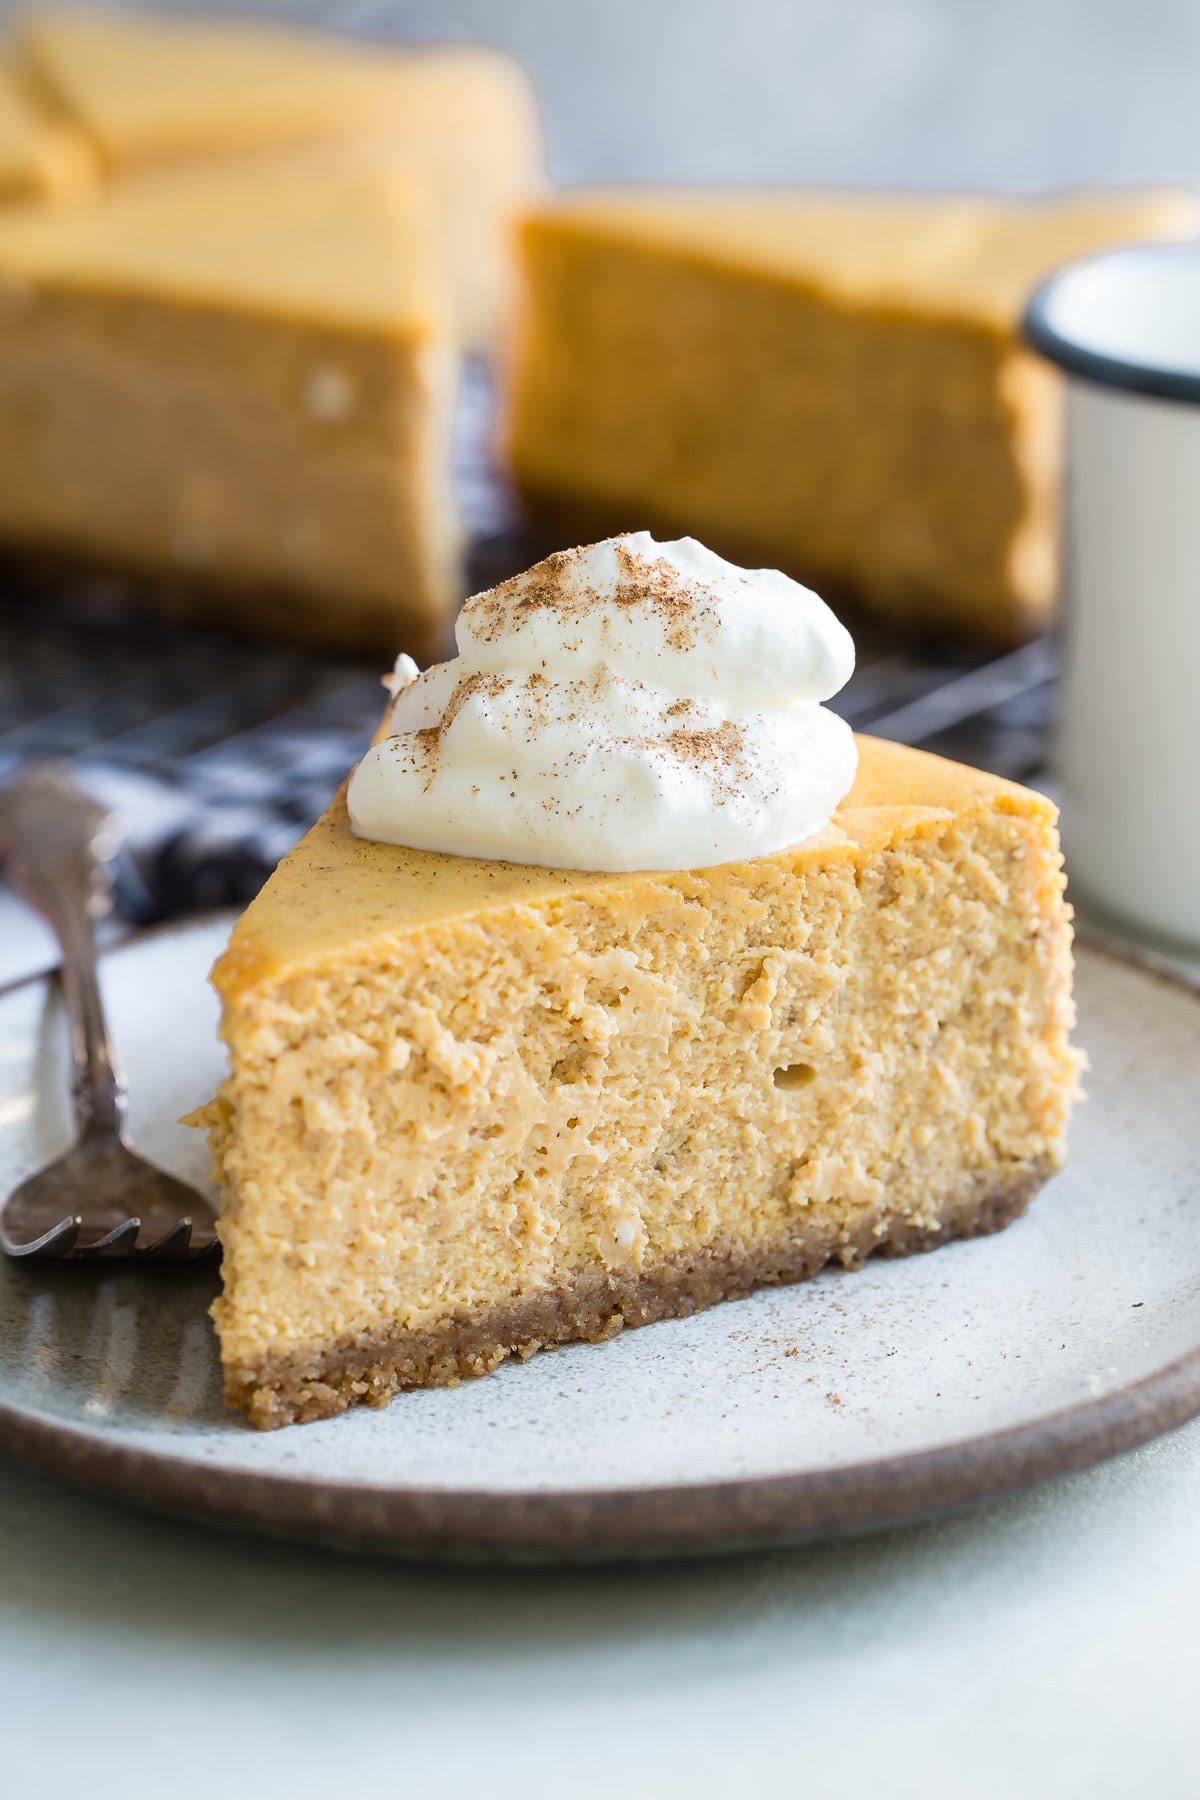 A slice of pumpkin cheesecake with whipped cream on a plate.